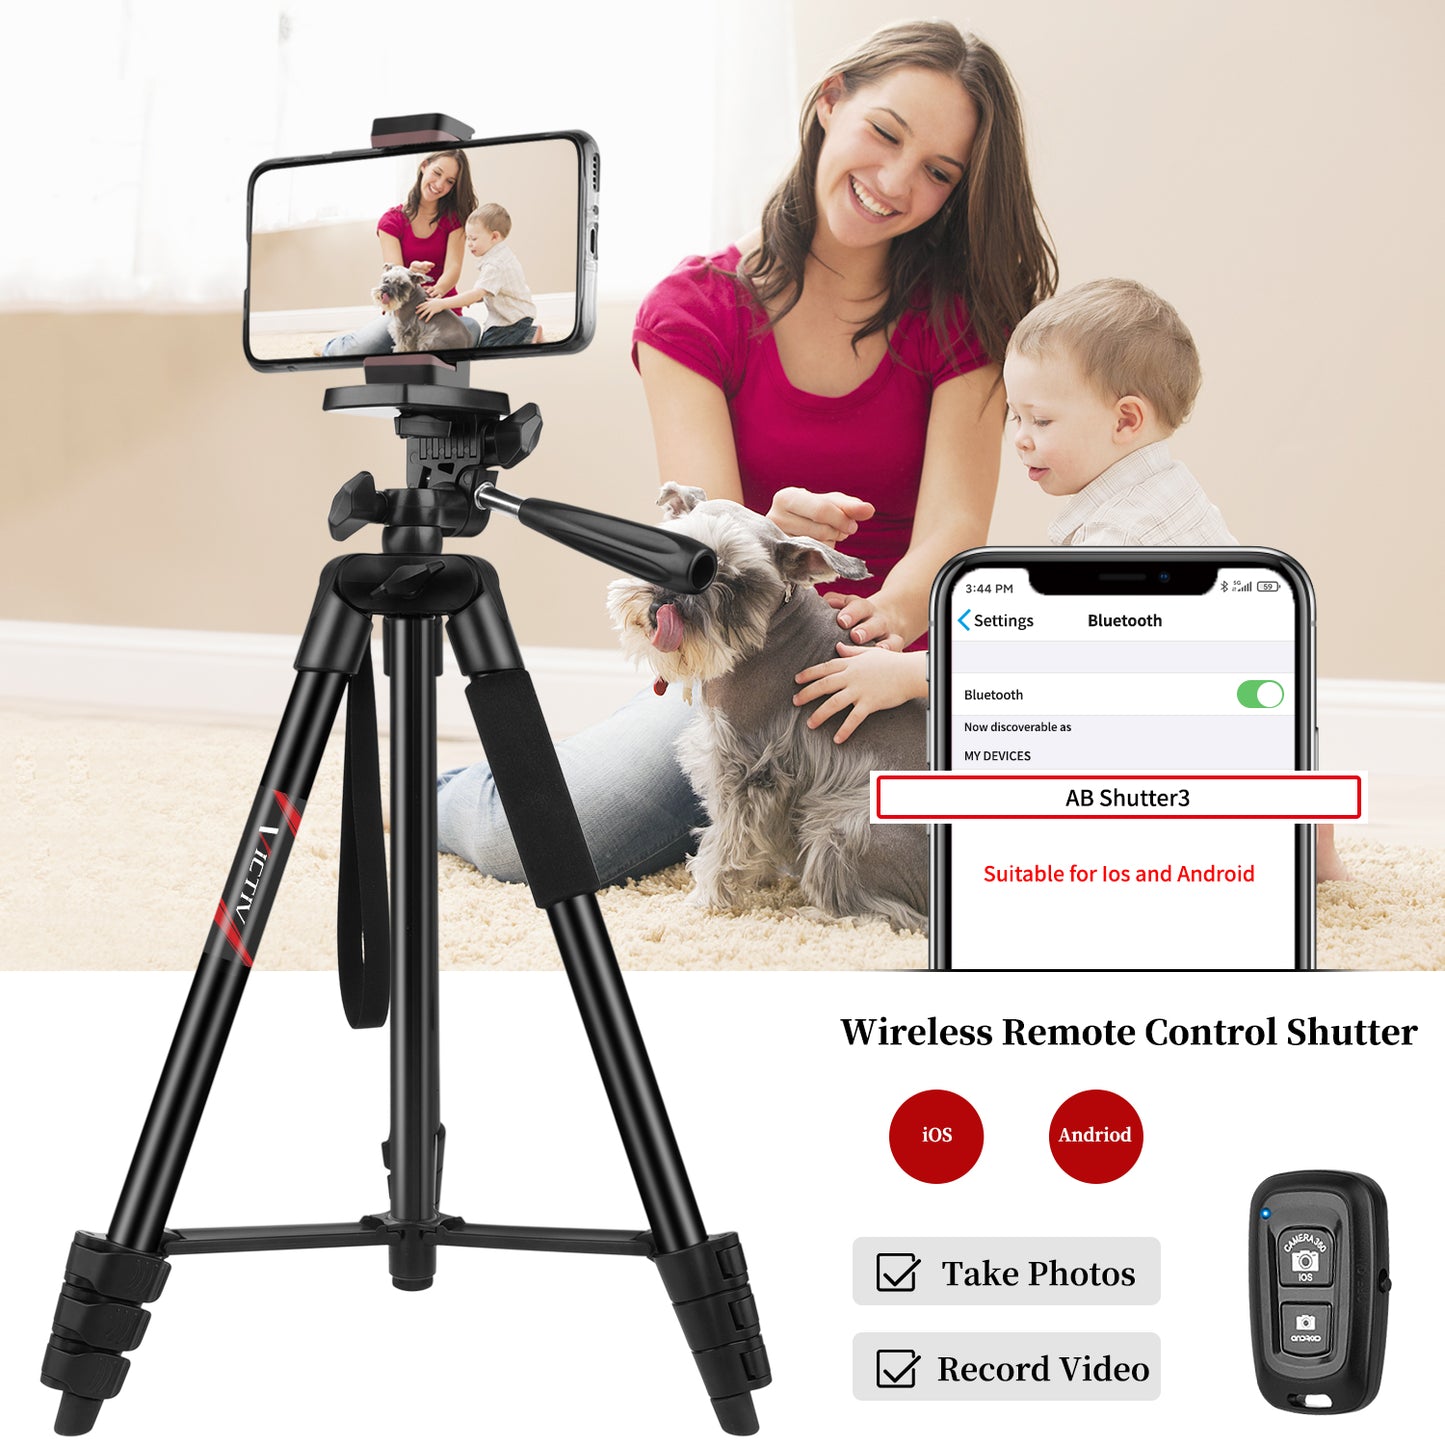 Victiv Phone Tripod, 54" Smartphone Tripod for iPhone, Aluminum Lightweight Portable Camera Tripod Stand for DSLR/Action Camera/Samsung with Phone Holder & Control Remote Shutter